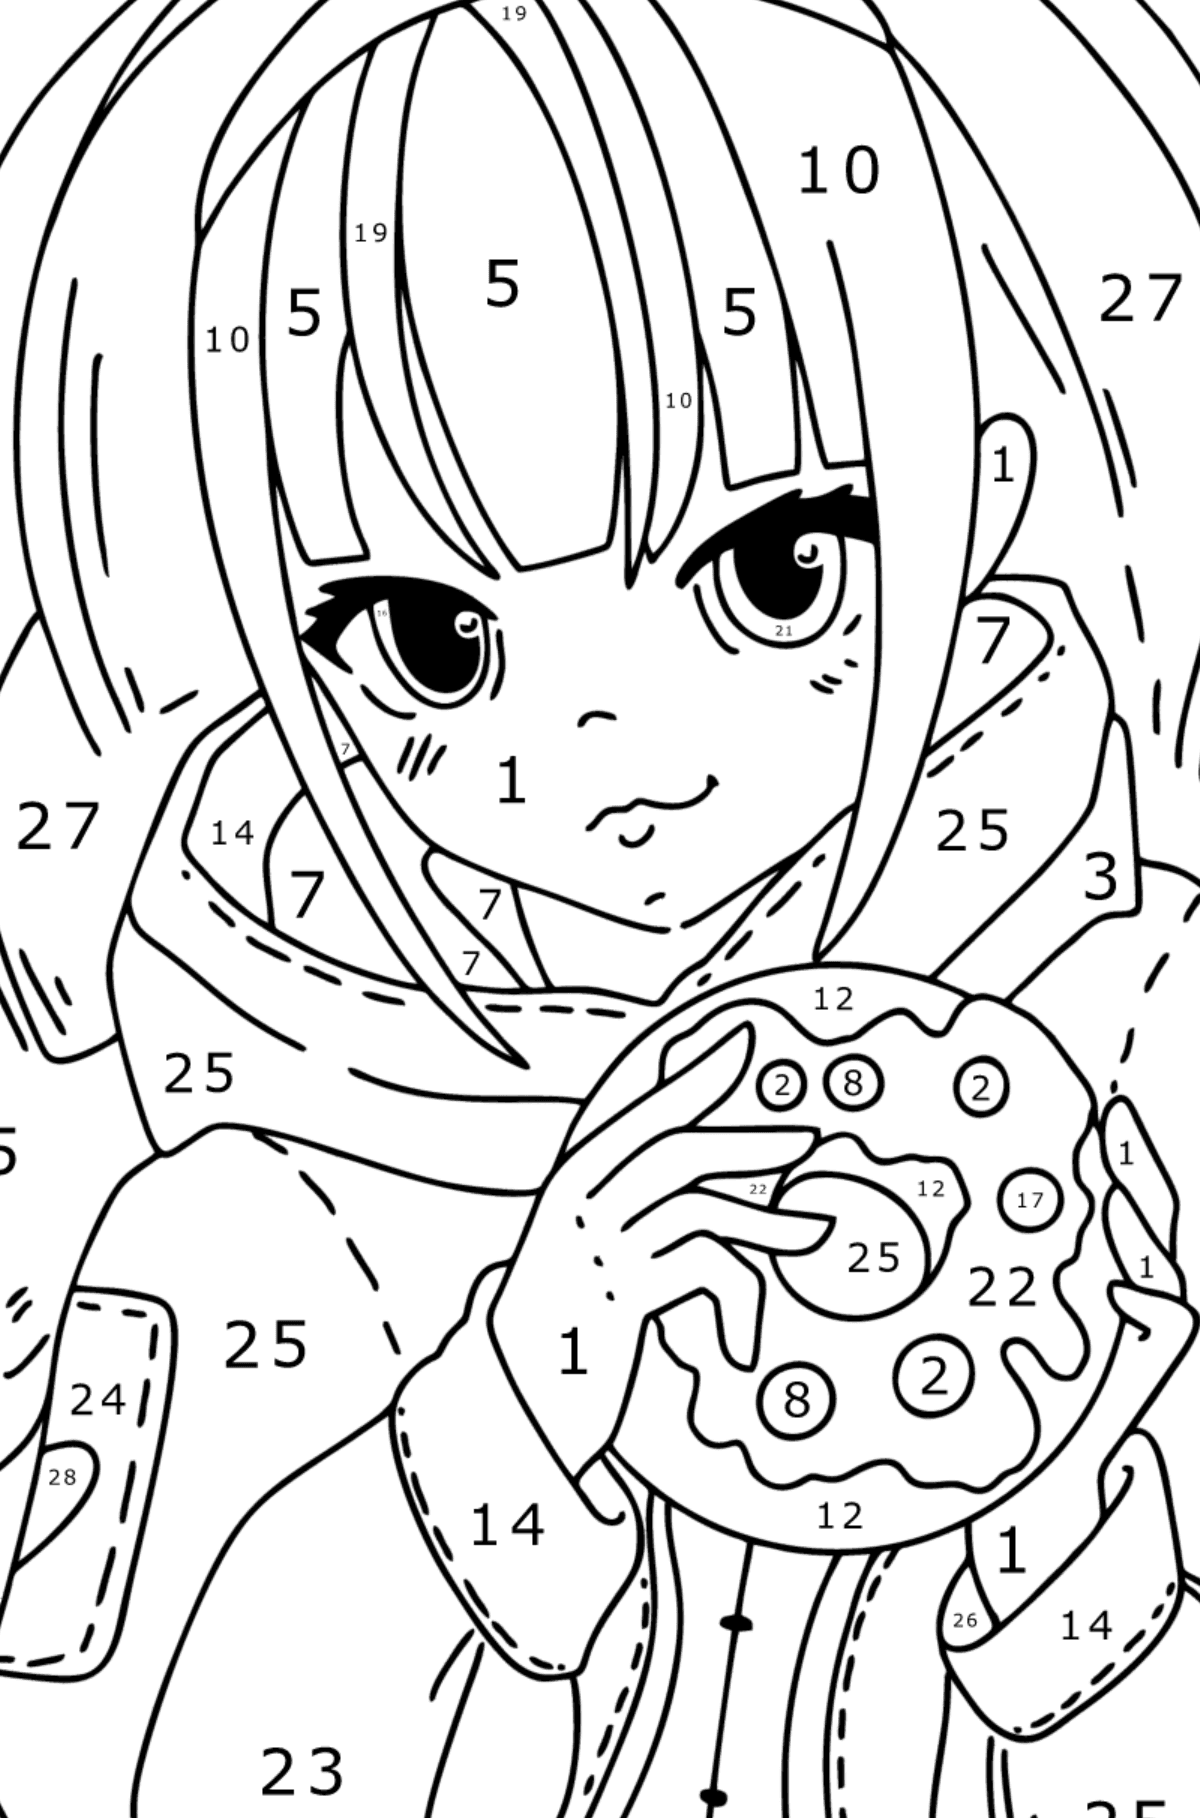 Japanese anime girl coloring page - Coloring by Numbers for Kids